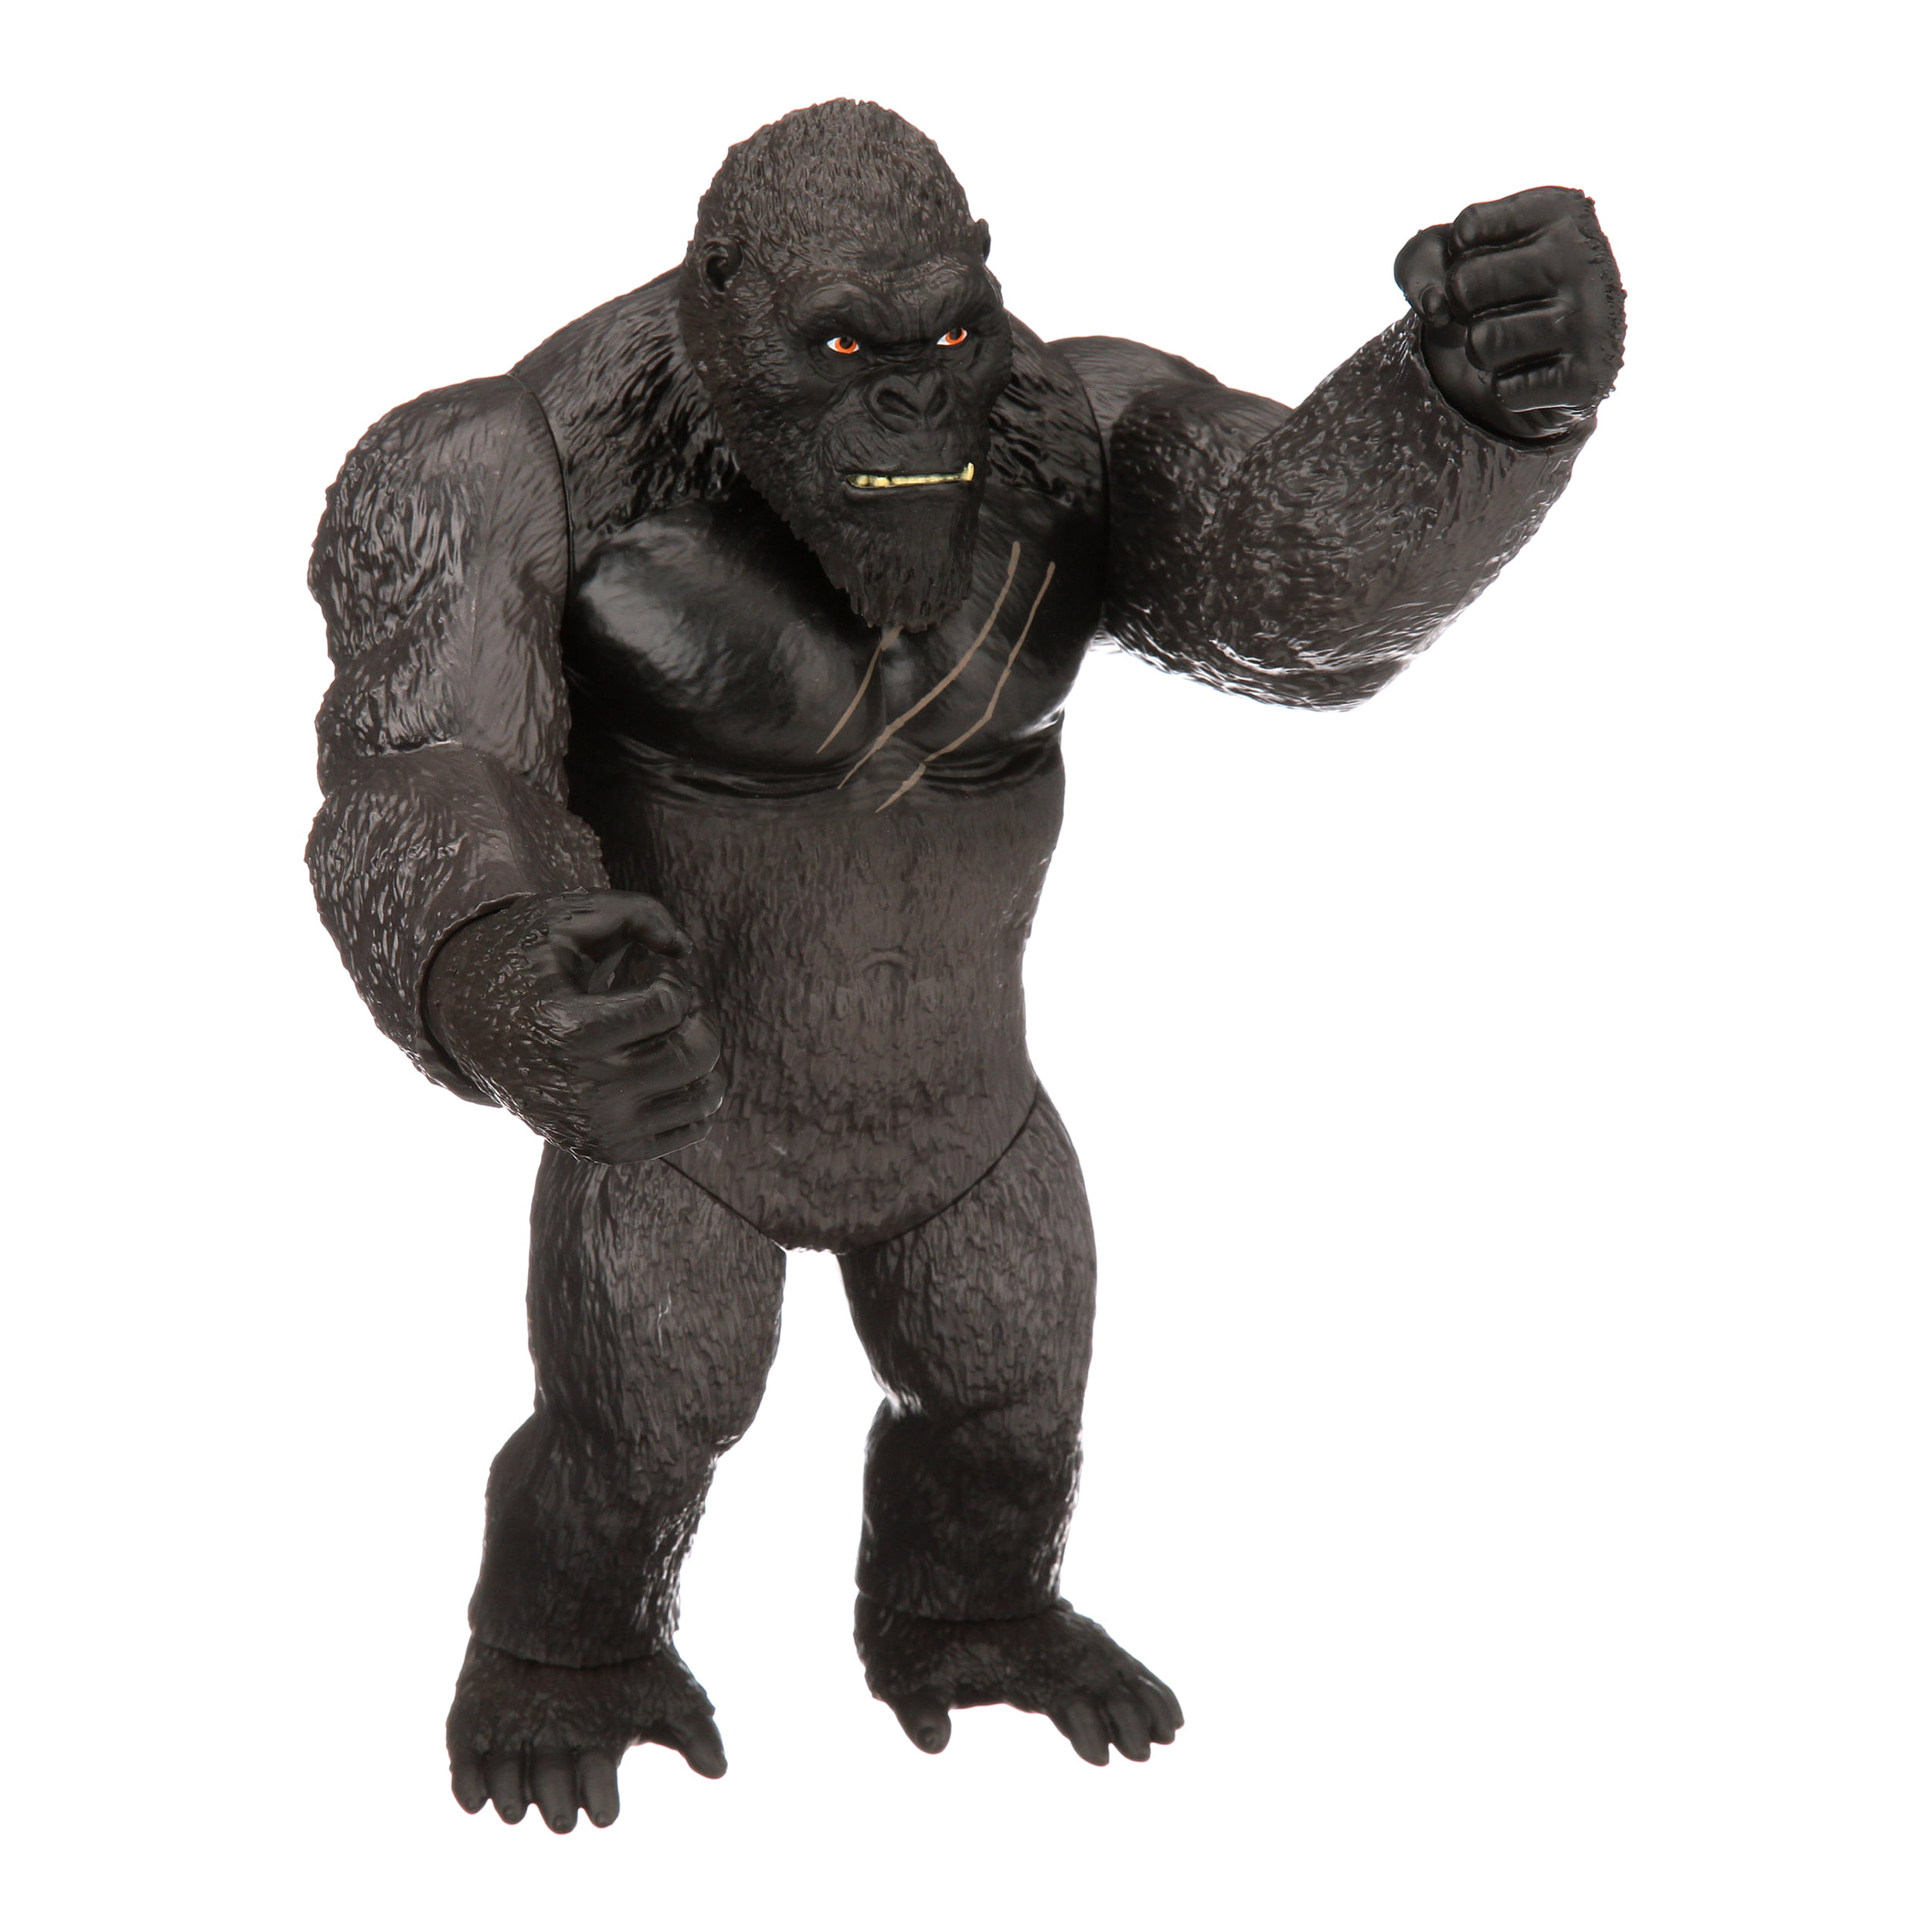 35562 for sale online Godzilla Vs Kong Giant Kong 11 inch Action Figure 